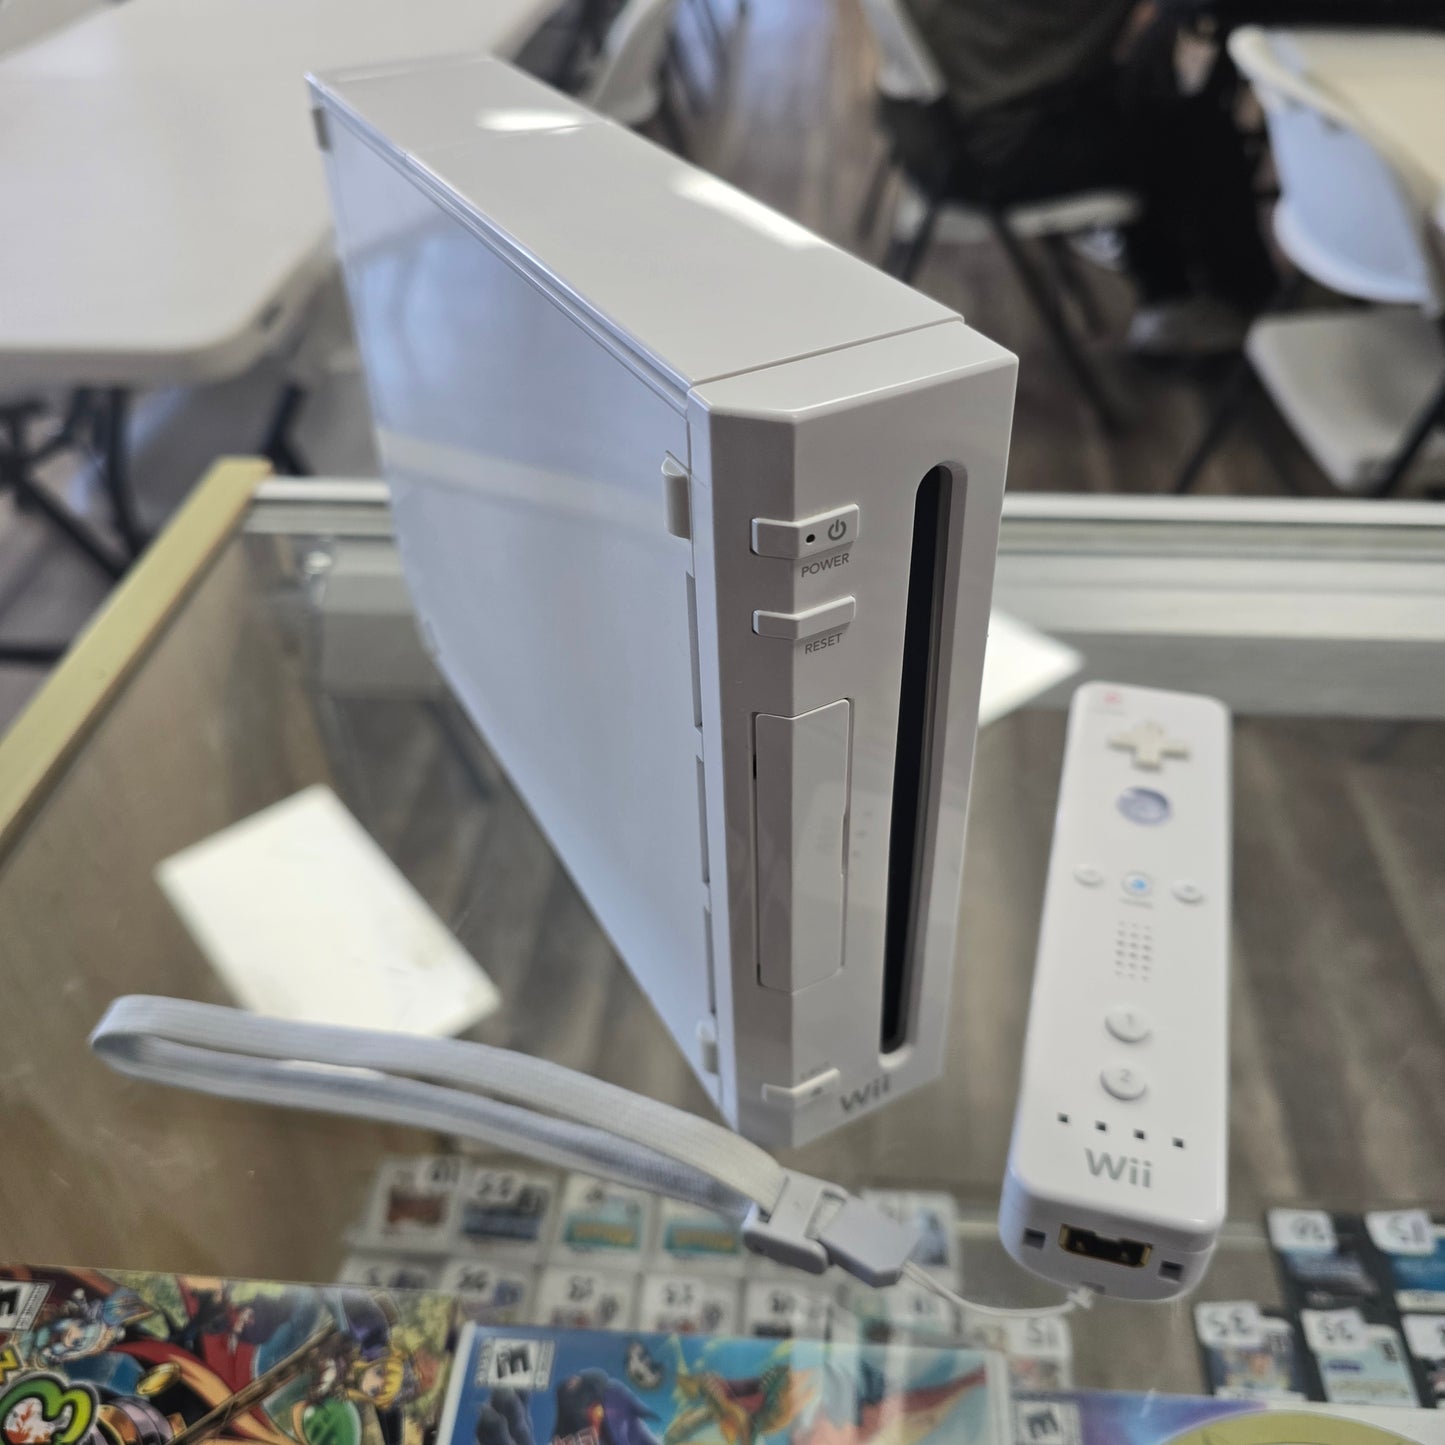 Nintendo Wii System With Wii controller and wires